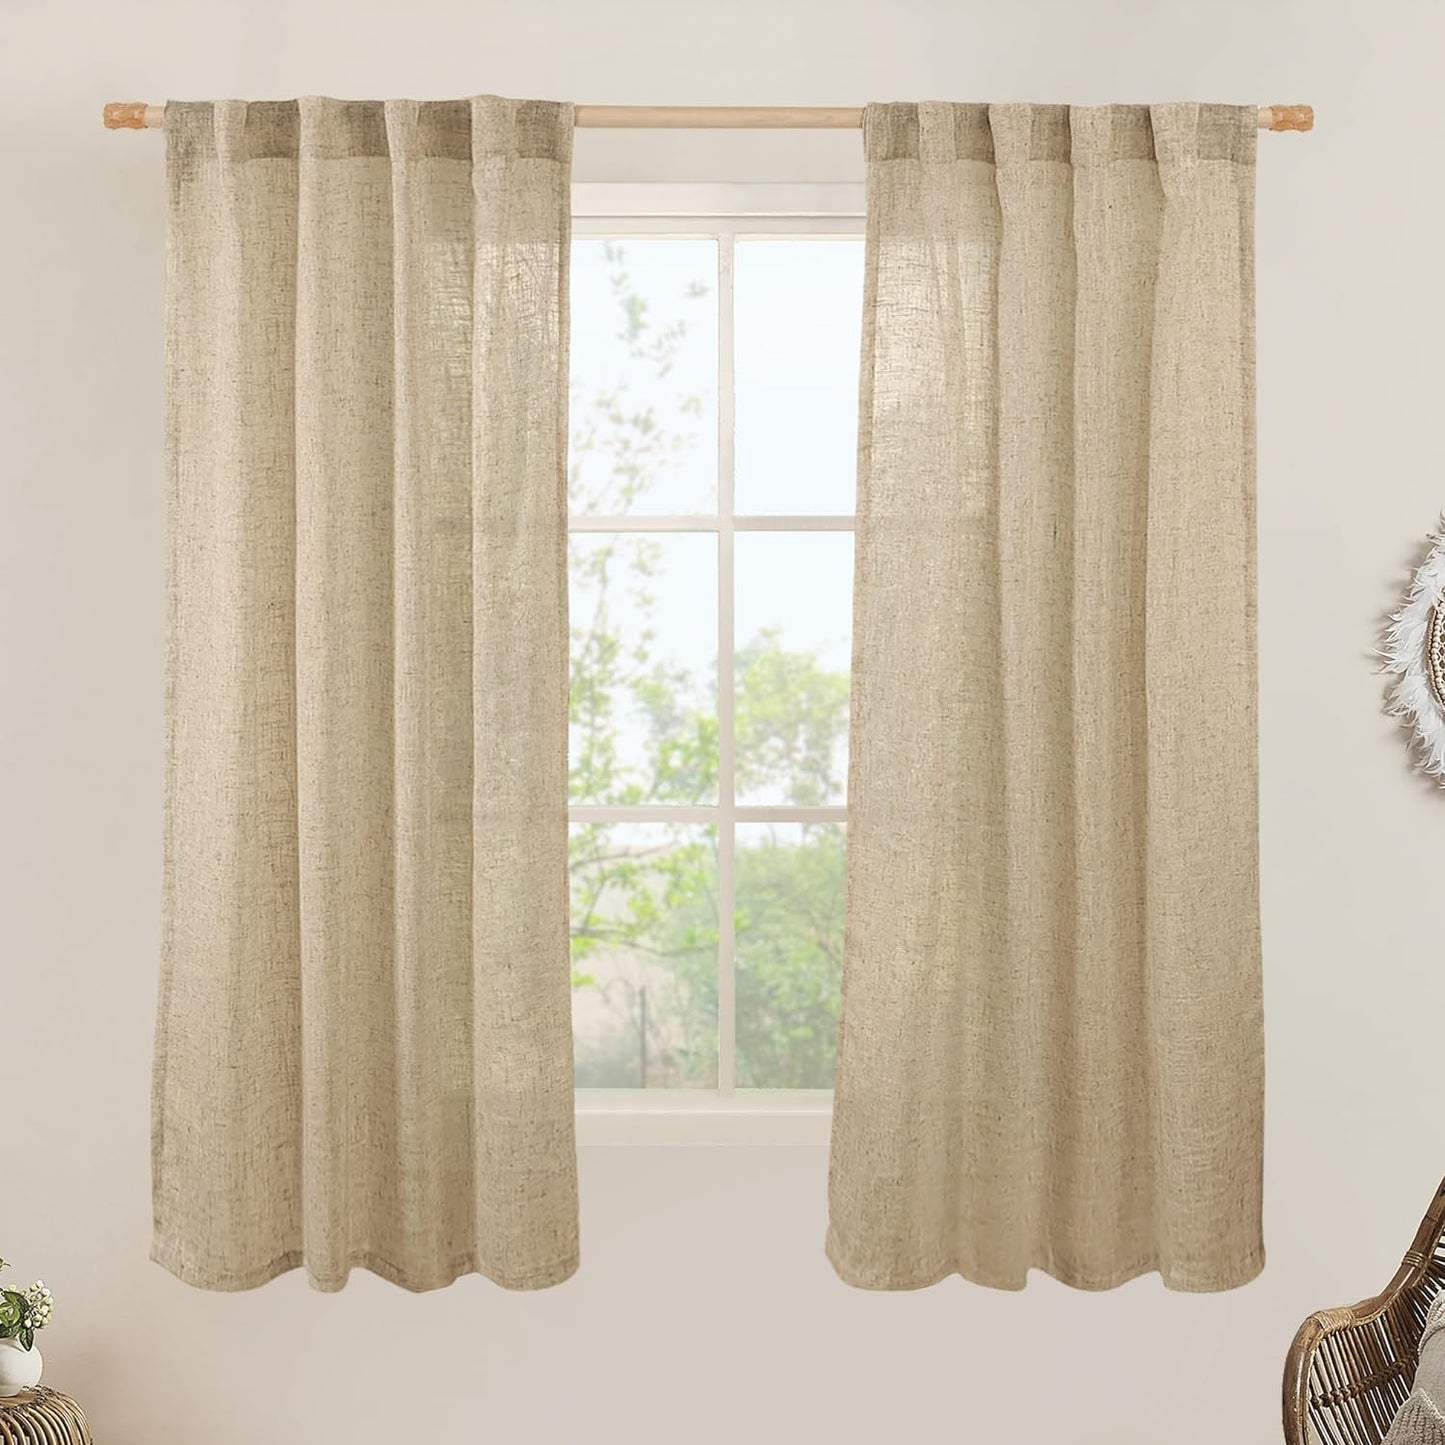 LAMIT Natural Linen Blended Curtains for Living Room, Back Tab and Rod Pocket Semi Sheer Curtains Light Filtering Country Rustic Drapes for Bedroom/Farmhouse, 2 Panels,52 X 108 Inch, Linen  LAMIT Brown 38W X 63L 